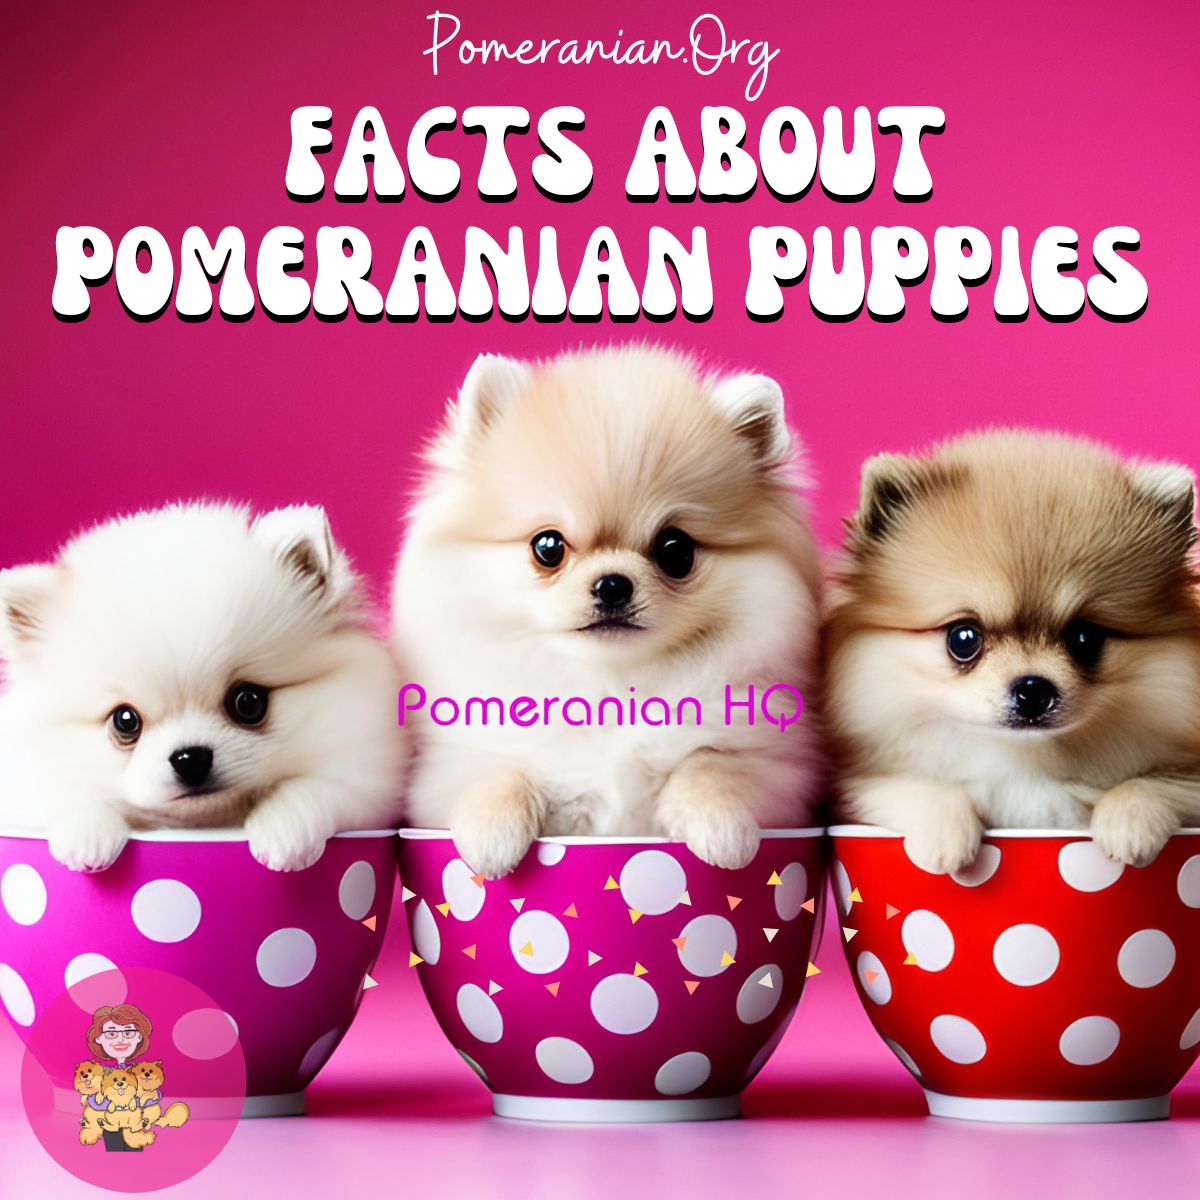 Facts About Pomeranian Puppies